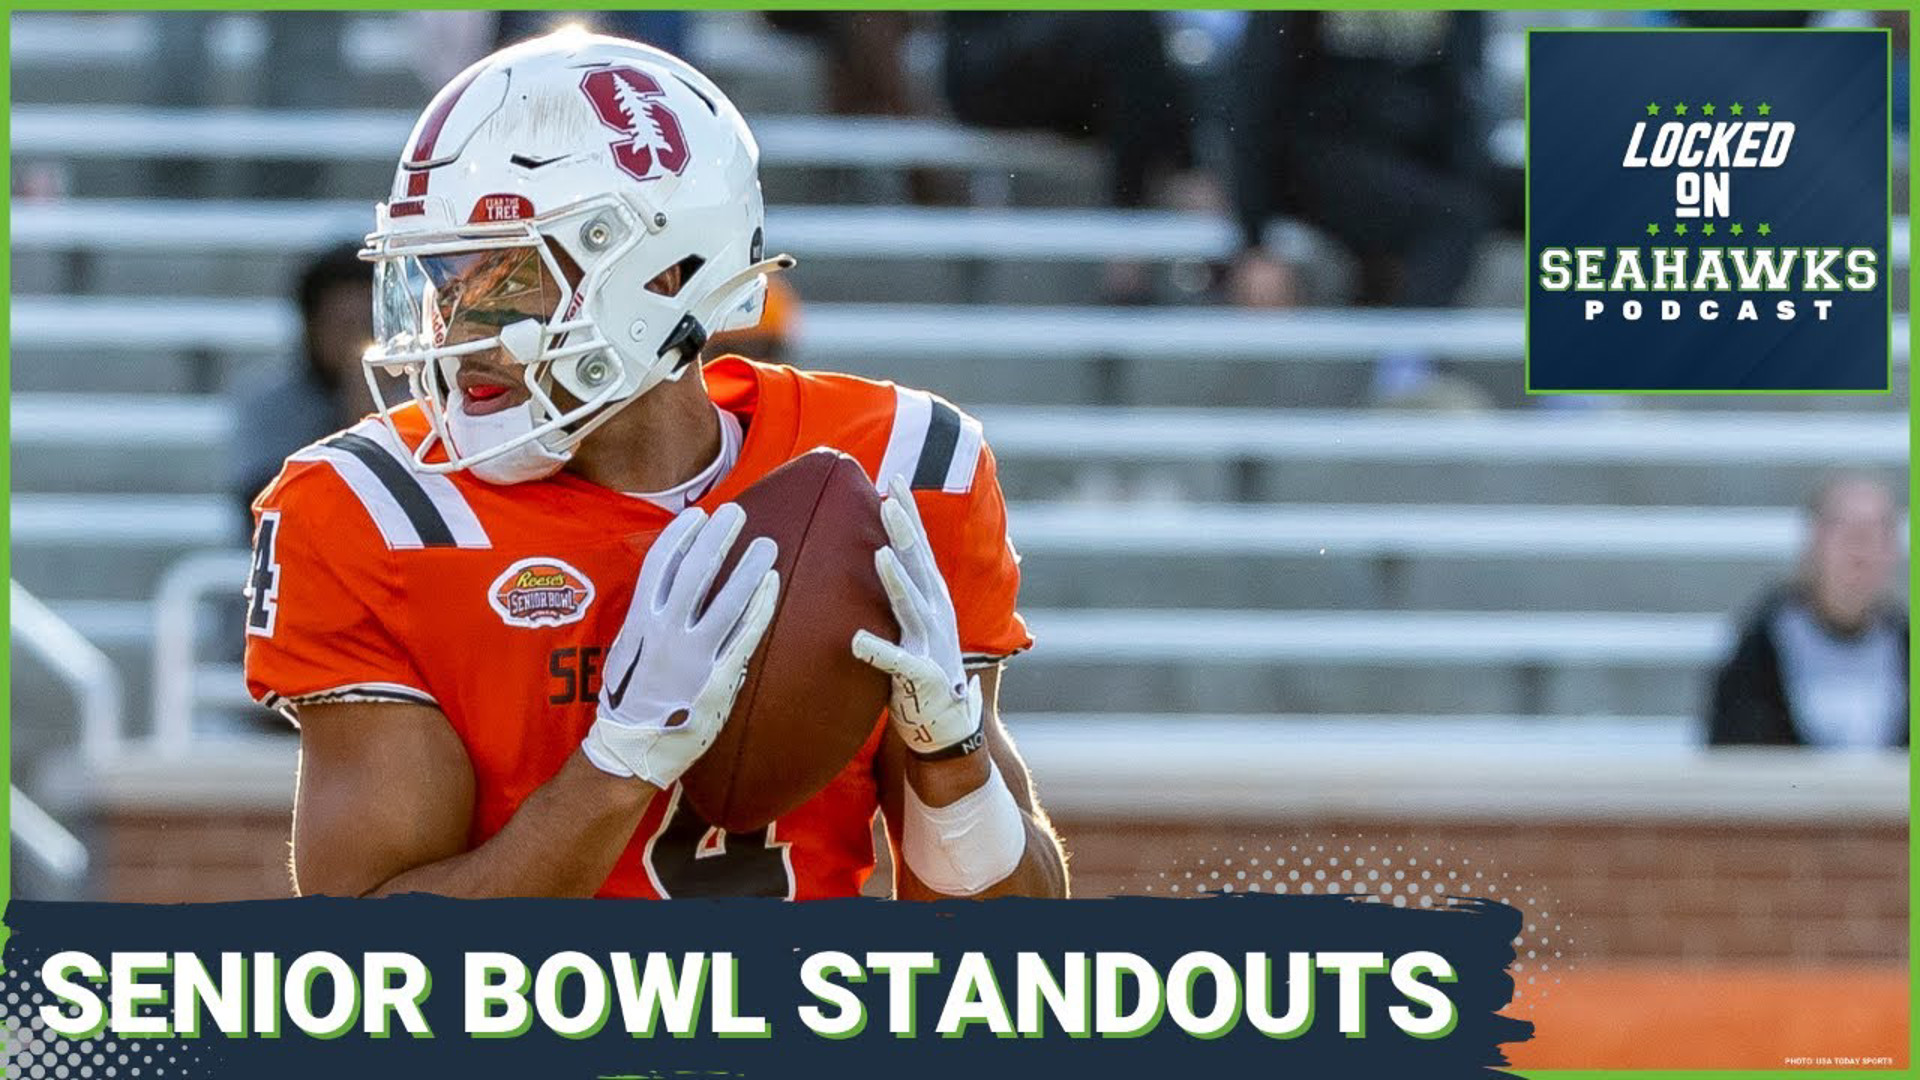 With dozens of scouts, executives, and coaches on hand, over 100 NFL hopefuls battled in Mobile aiming to impress at the Senior Bowl last week.